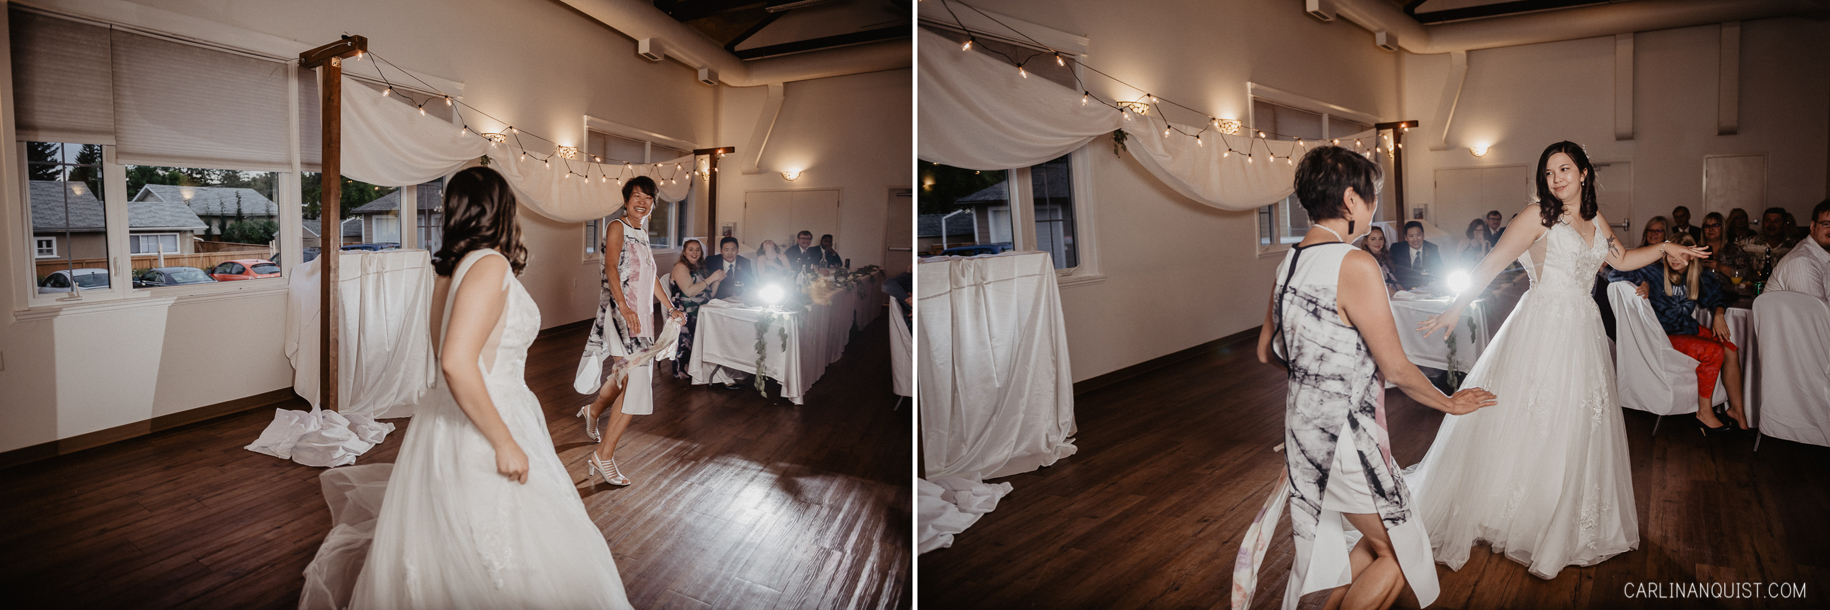 Mother-Daughter Dance | Bowness Scout Hall Wedding